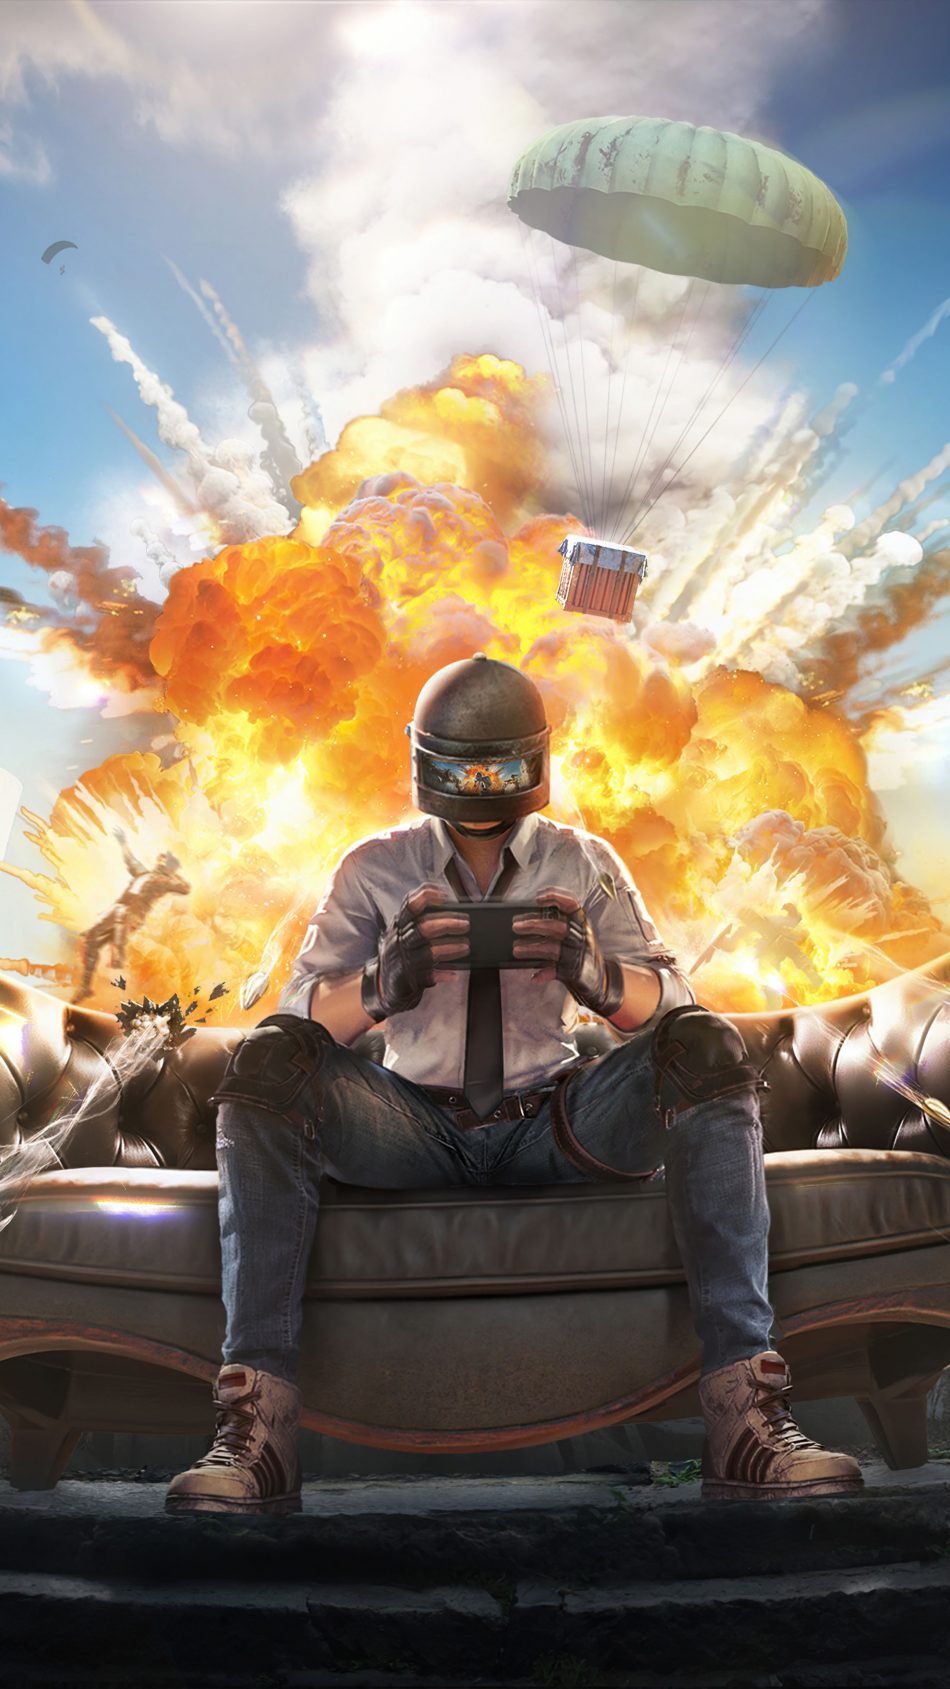 PUBG 2022 Gaming Poster Explosion Background 4K Ultra HD Mobile Wallpaper